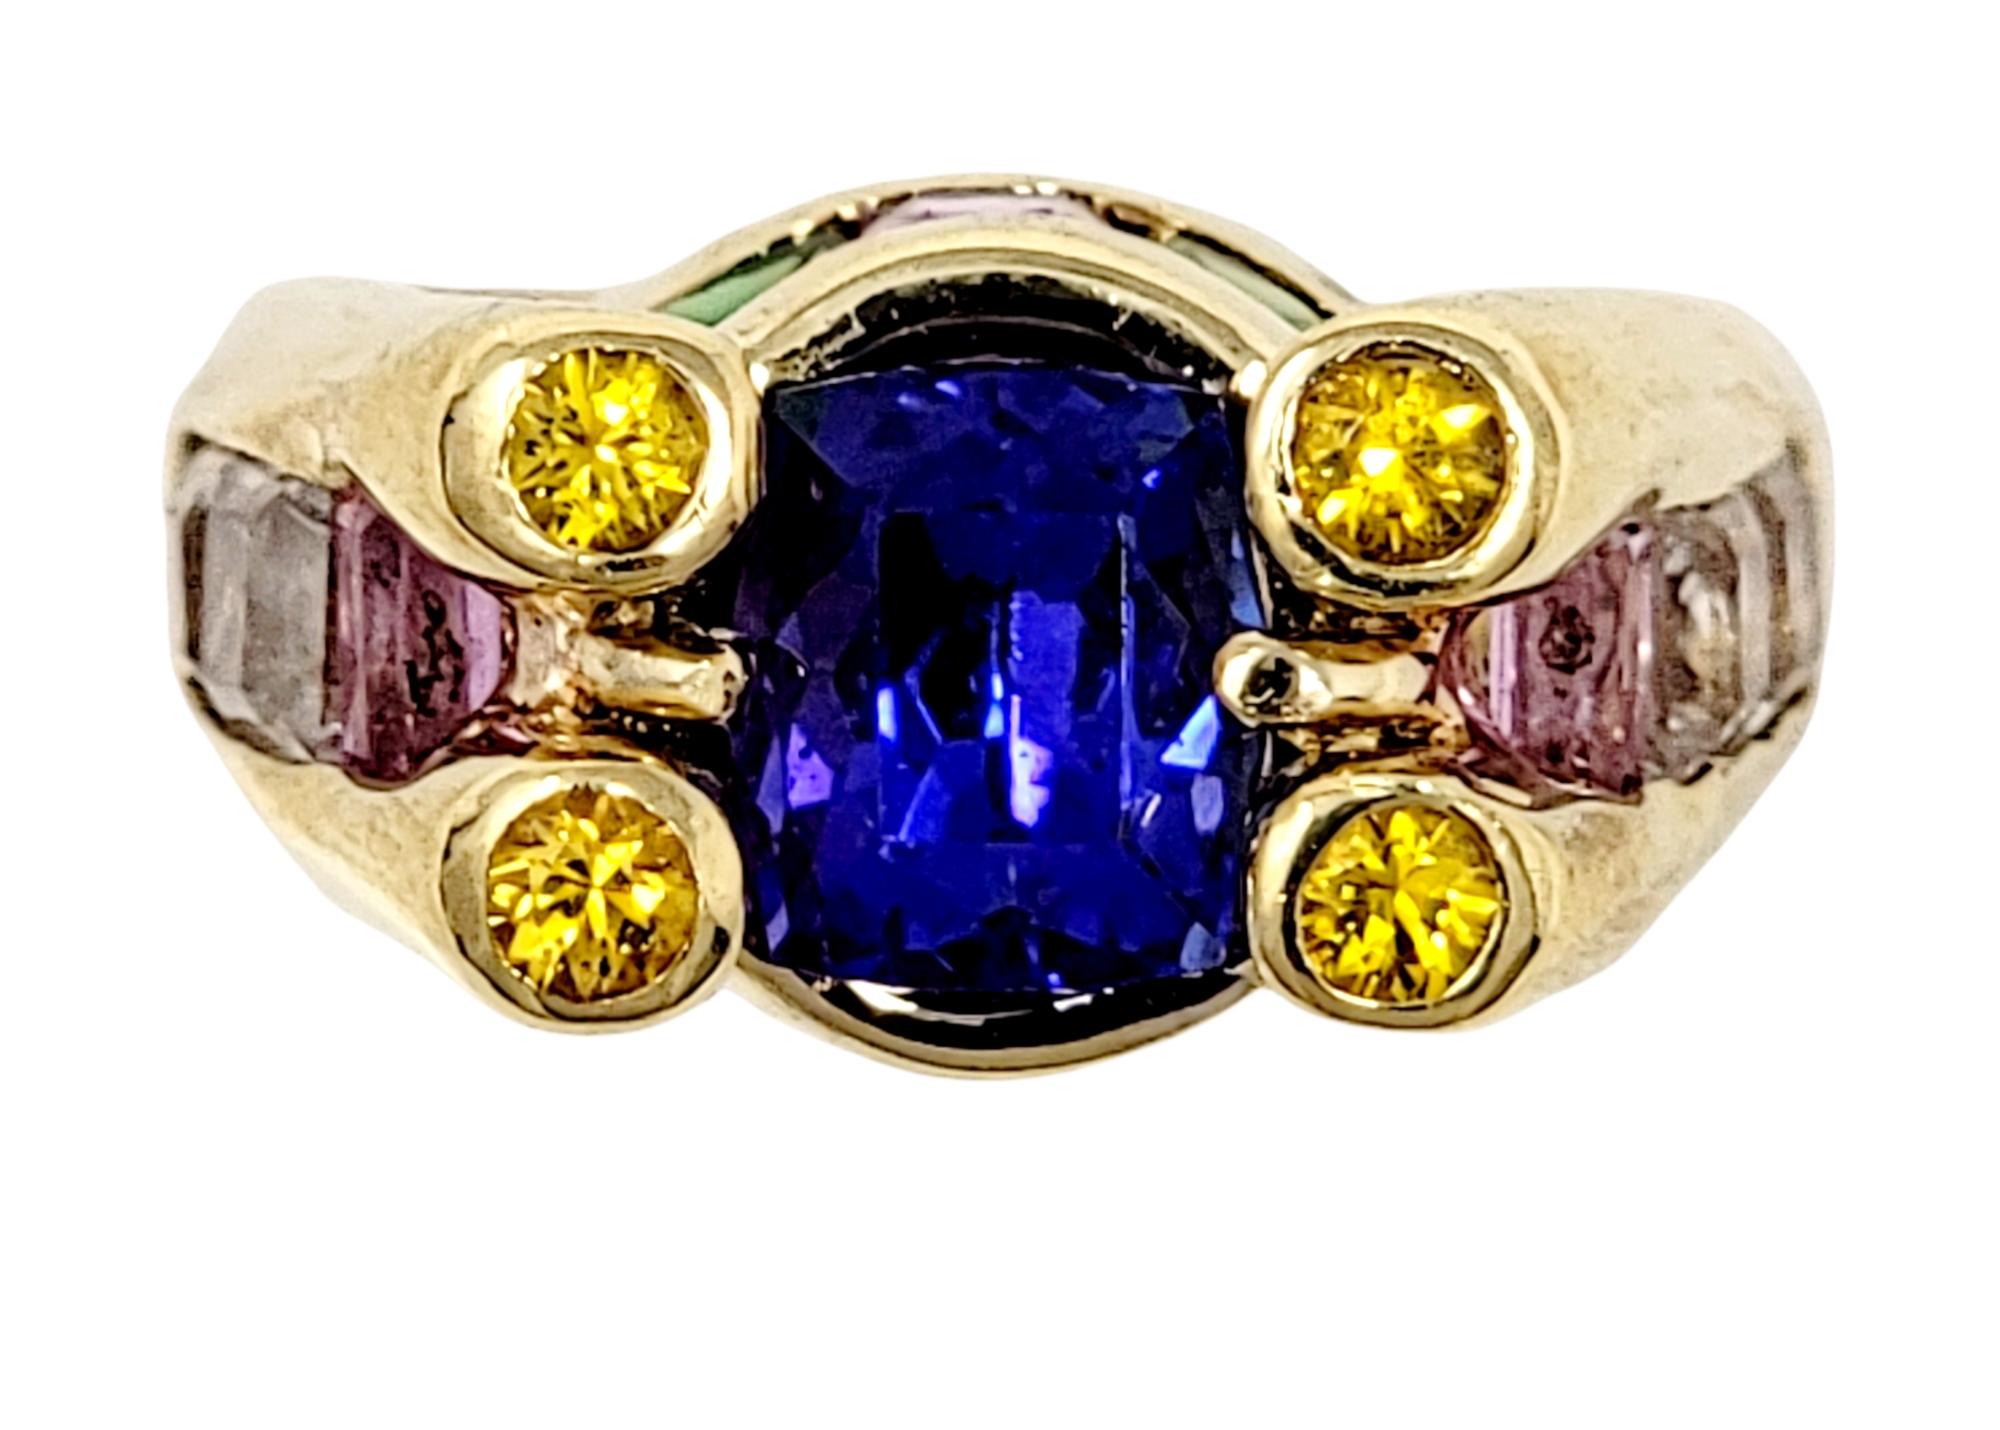 Ring size: 6

Colorful contemporary ring with unique artful design. Bursting with bold colors and sleek lines, this high profile ring will stand out on the finger and make an extraordinary statement.

Ring size: 6
Metal: 18K Yellow Gold
Weight: